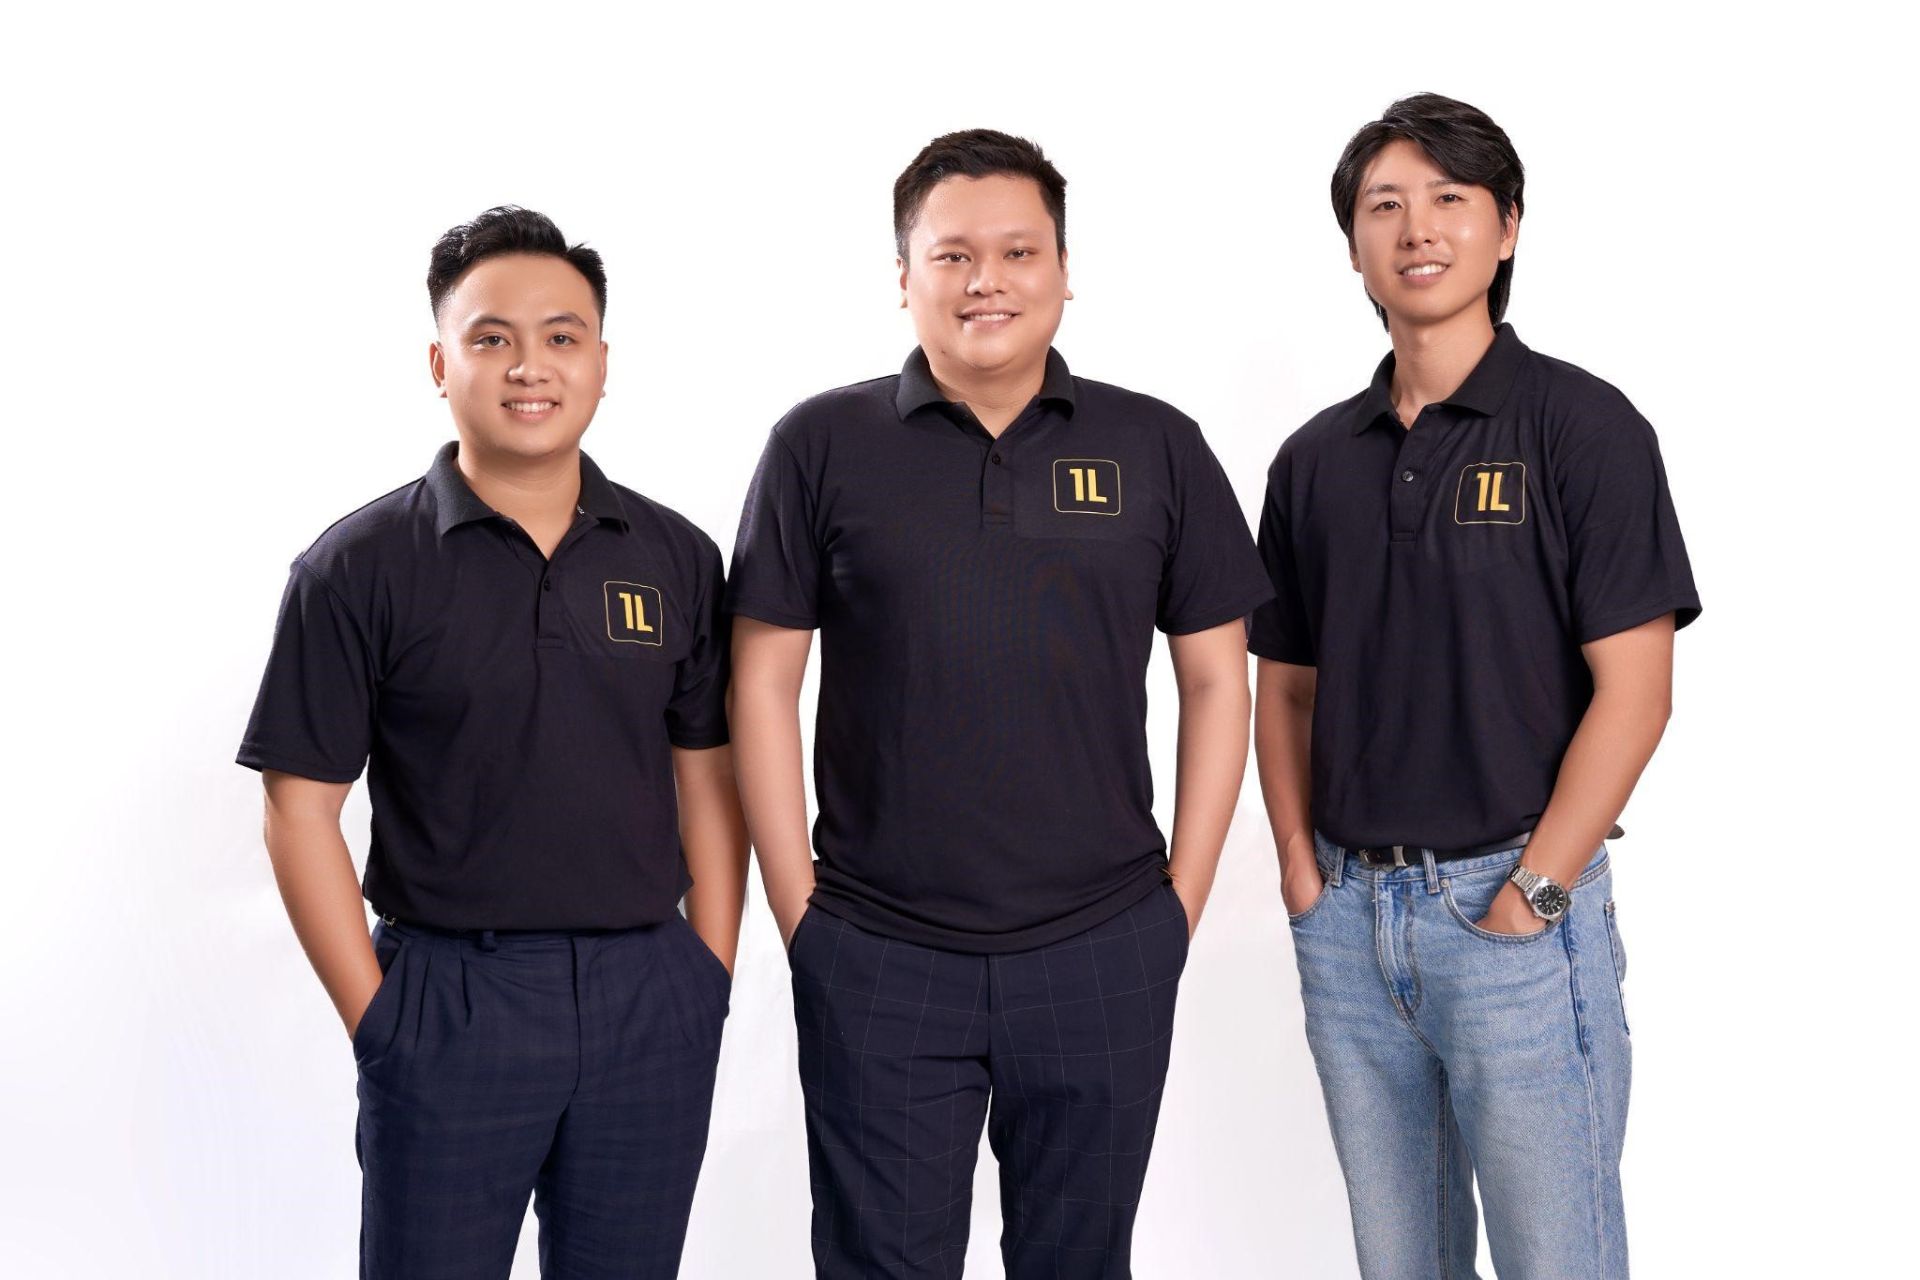 From left to right: Hoang Nguyen, Co-founder and COO; Michael Do, Co-founder and CEO & Joshua Hong, Co-founder and CBO of 1Long